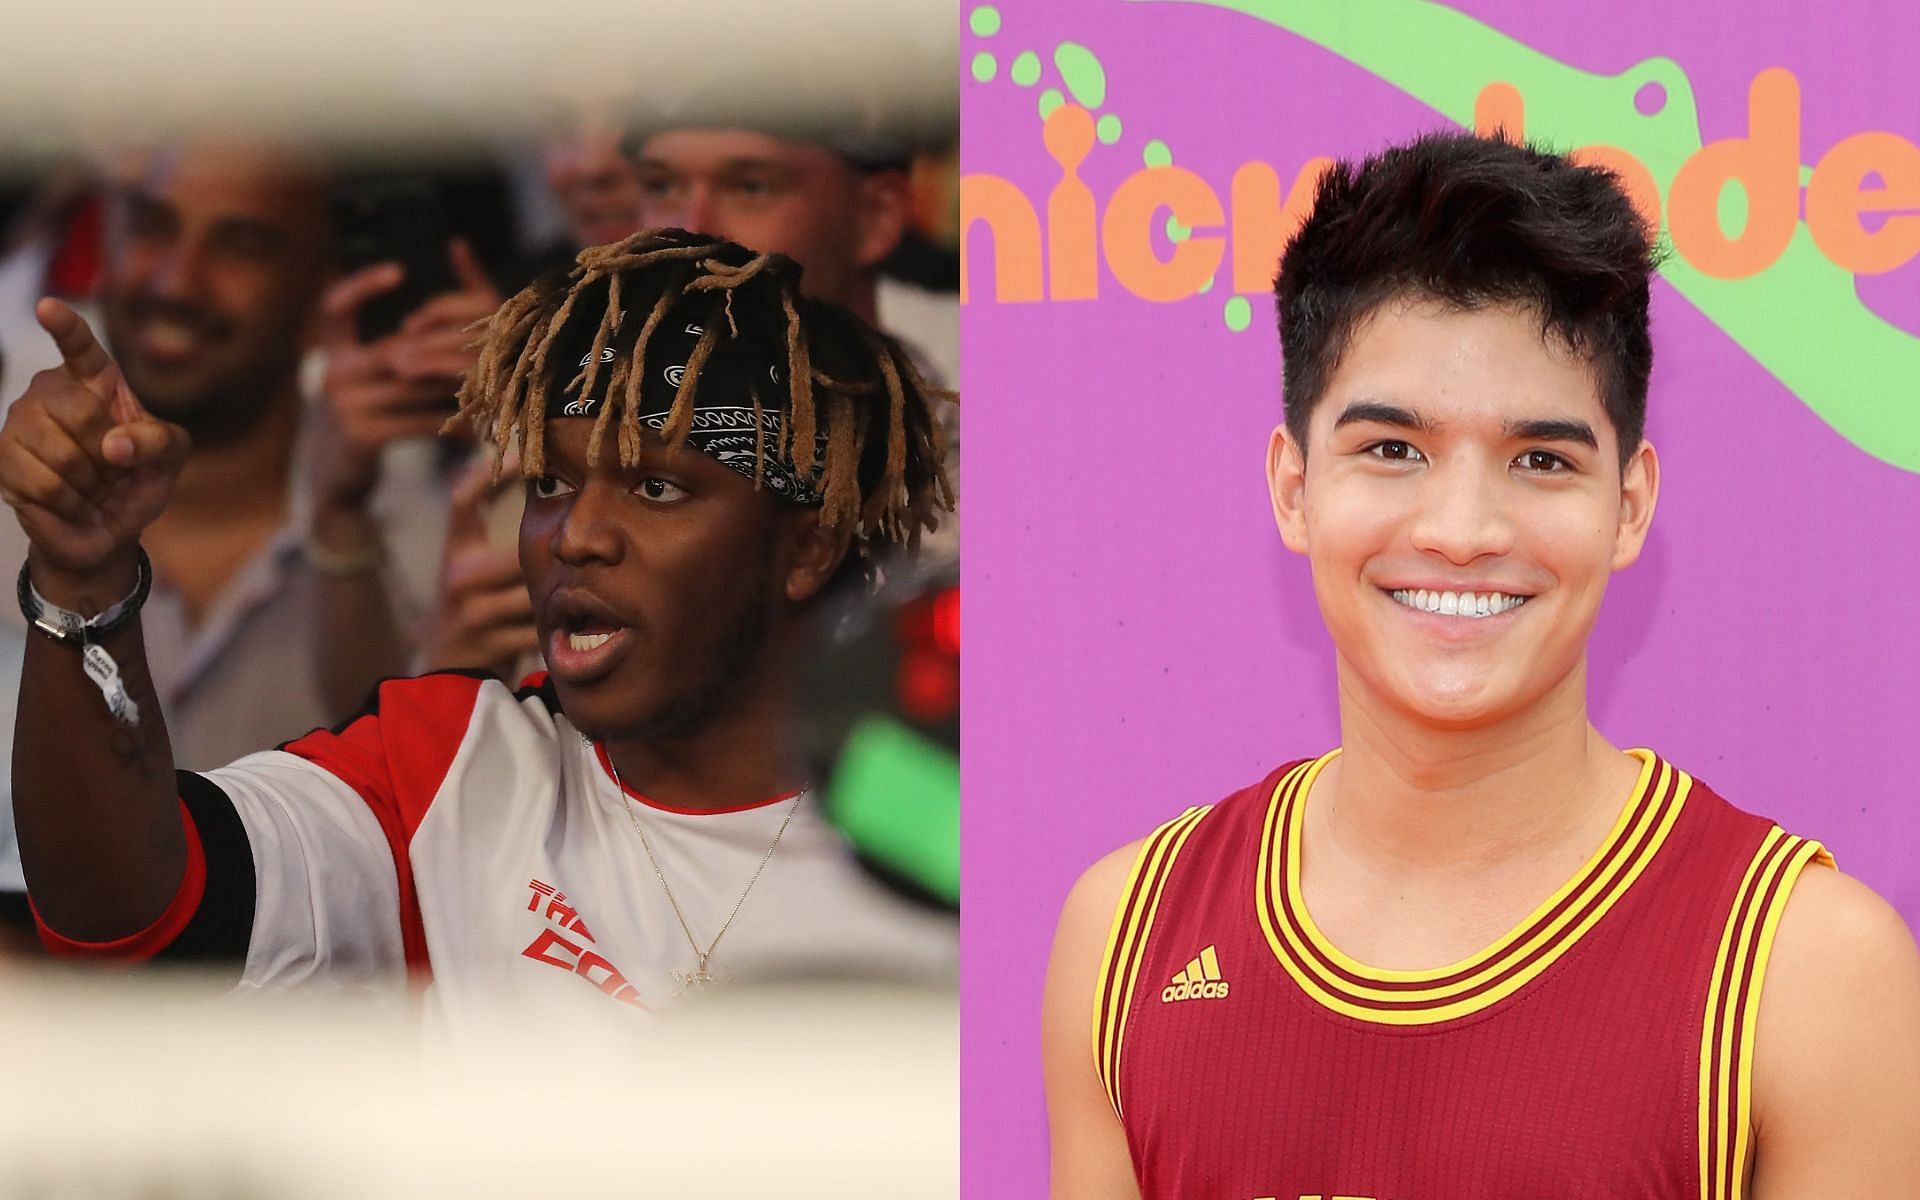 KSI issues stern warning to Alex Wassabi in their first face-off on YouTube